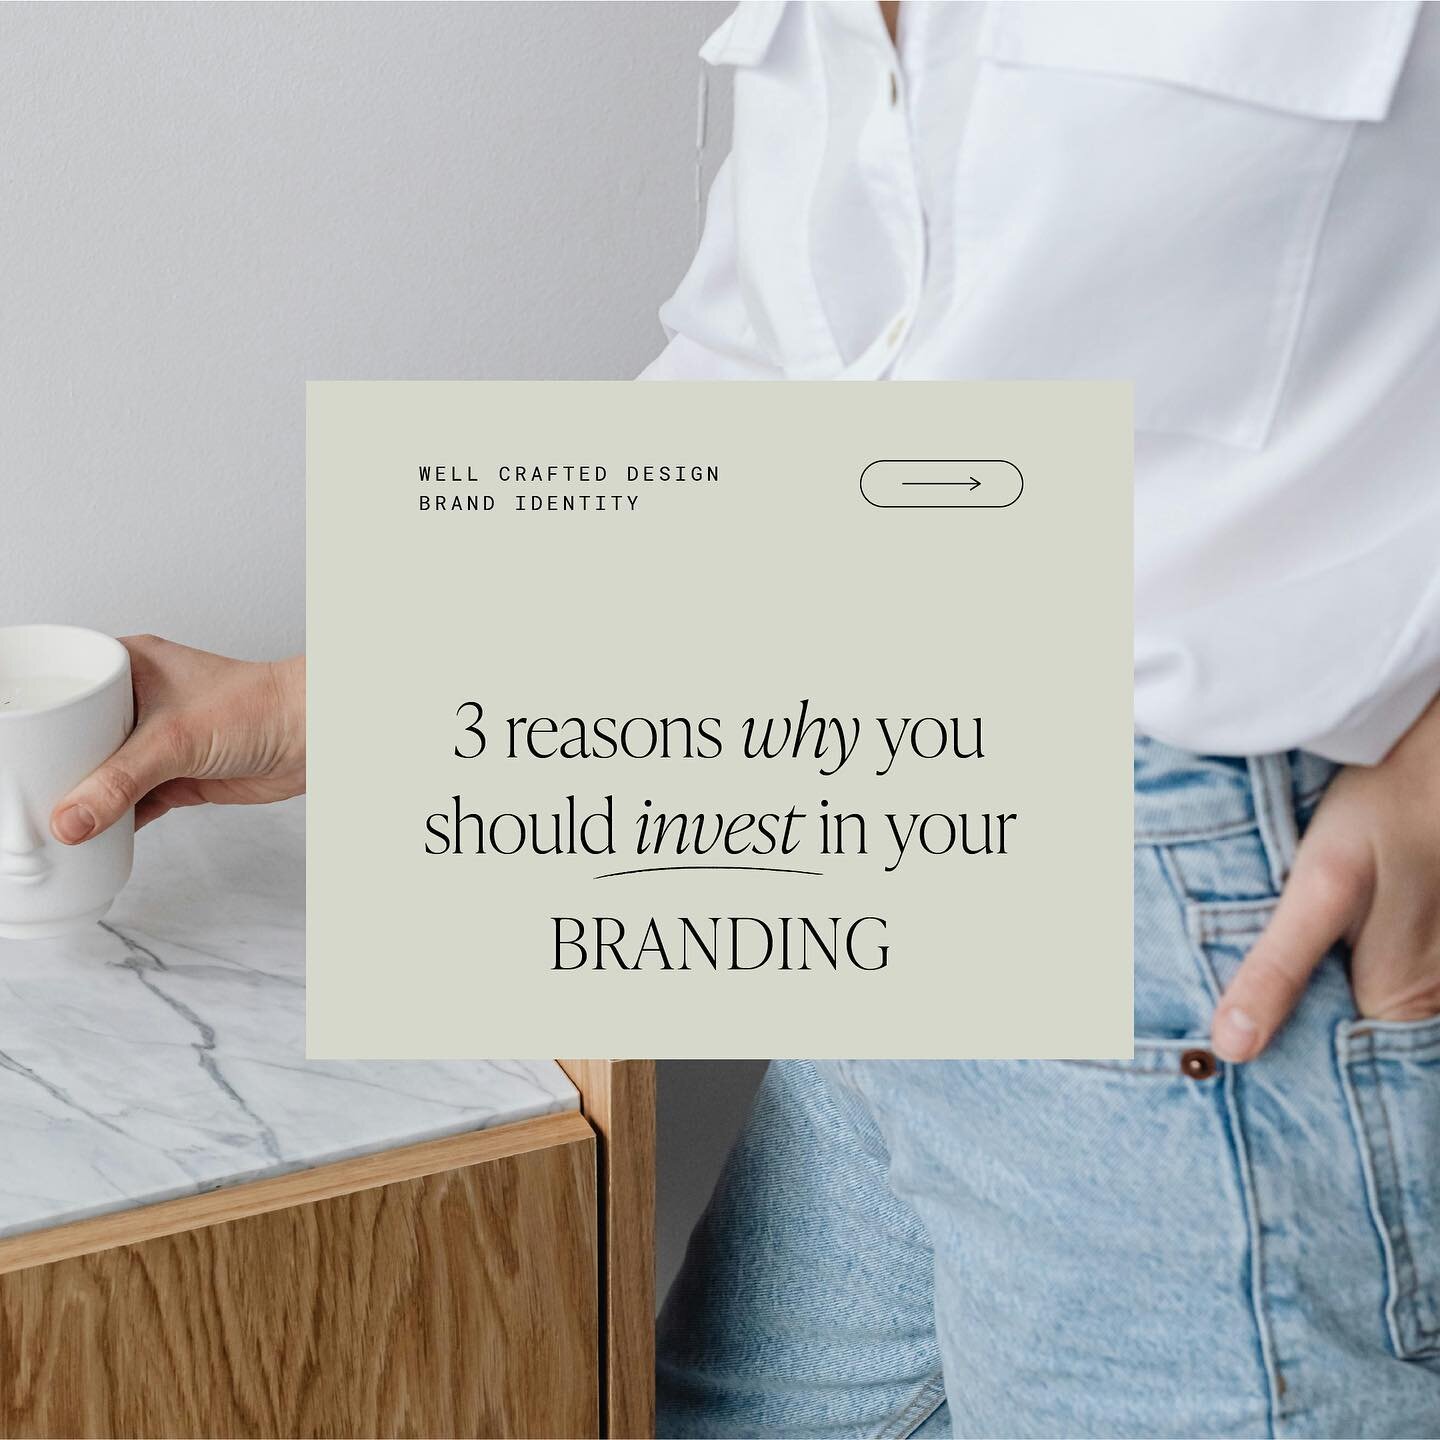 Here are just 3 reasons why you should invest in your branding ⬆️⁣
⁣
As a small business owner, investing in professional brand identity can bring a range of advantages to your business. ⁣
⁣
In summary it can help establish credibility, differentiate